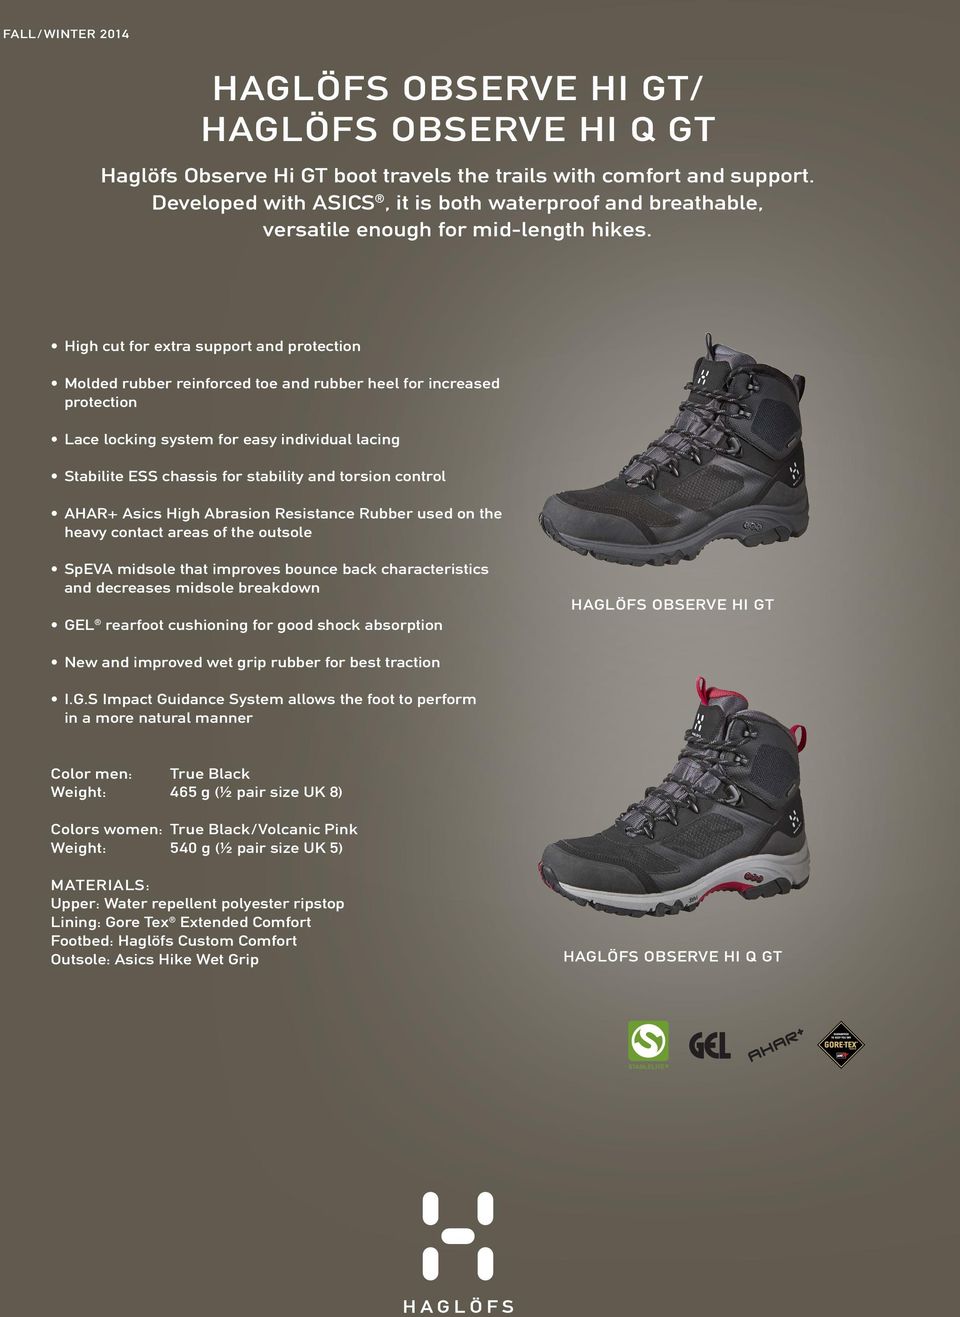 High cut for extra support and protection Molded rubber reinforced toe and rubber heel for increased protection Lace locking system for easy individual lacing Stabilite ESS chassis for stability and